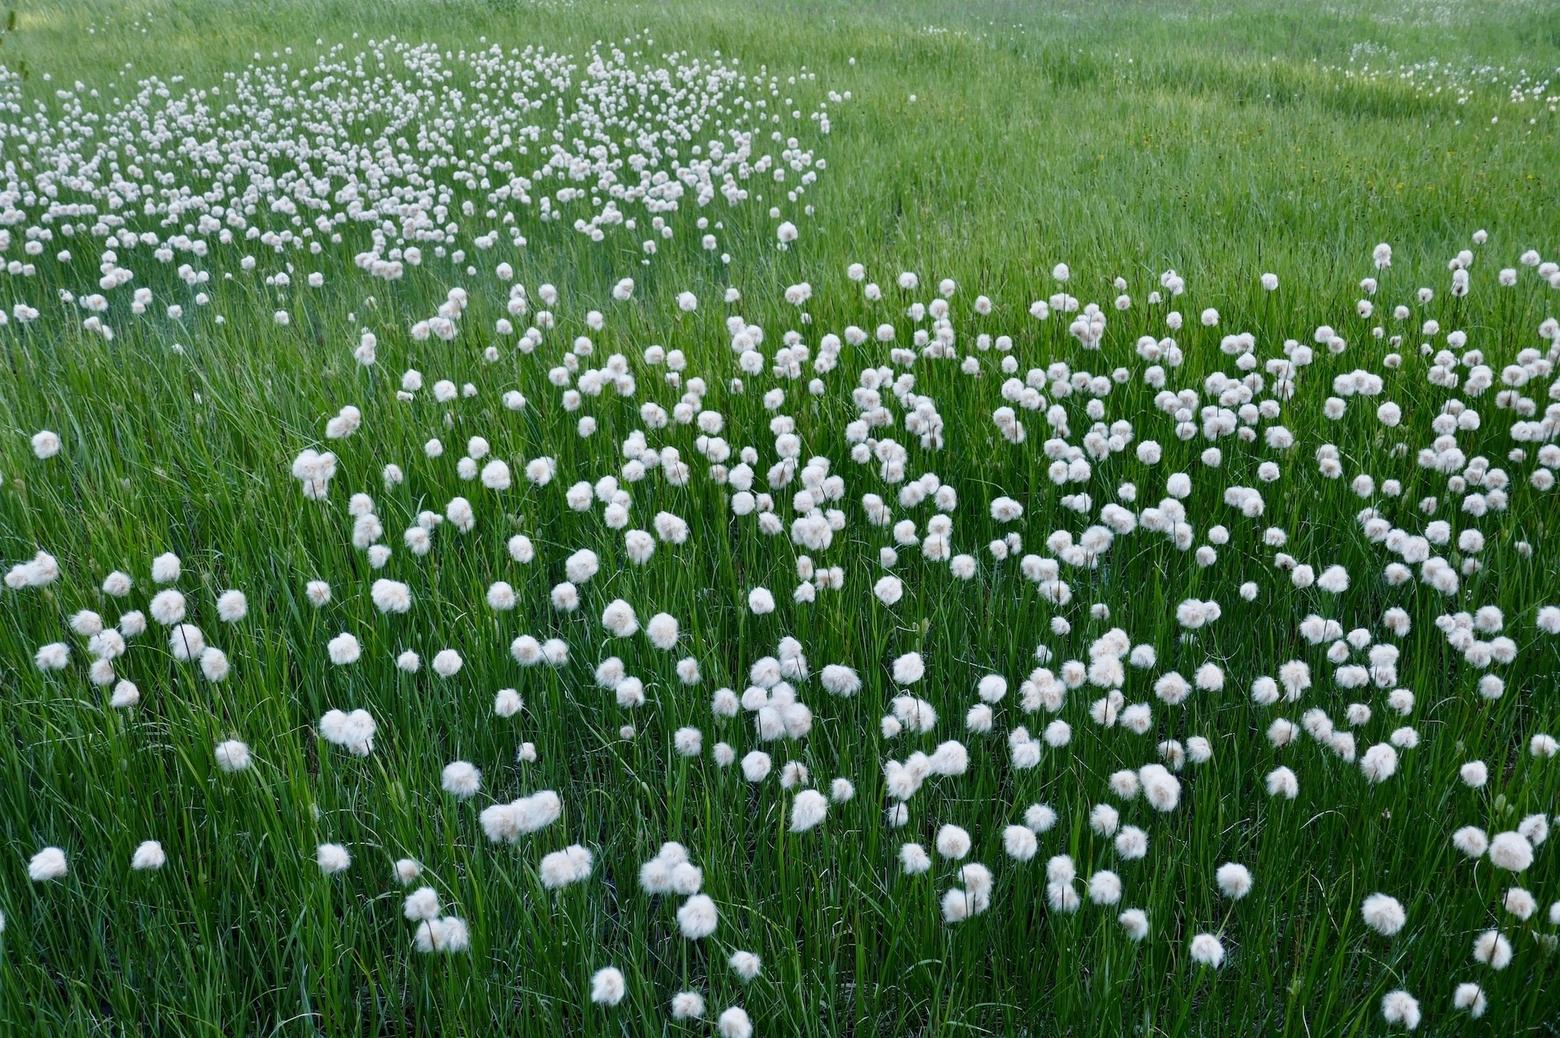 A community of cottongrass off-trail.